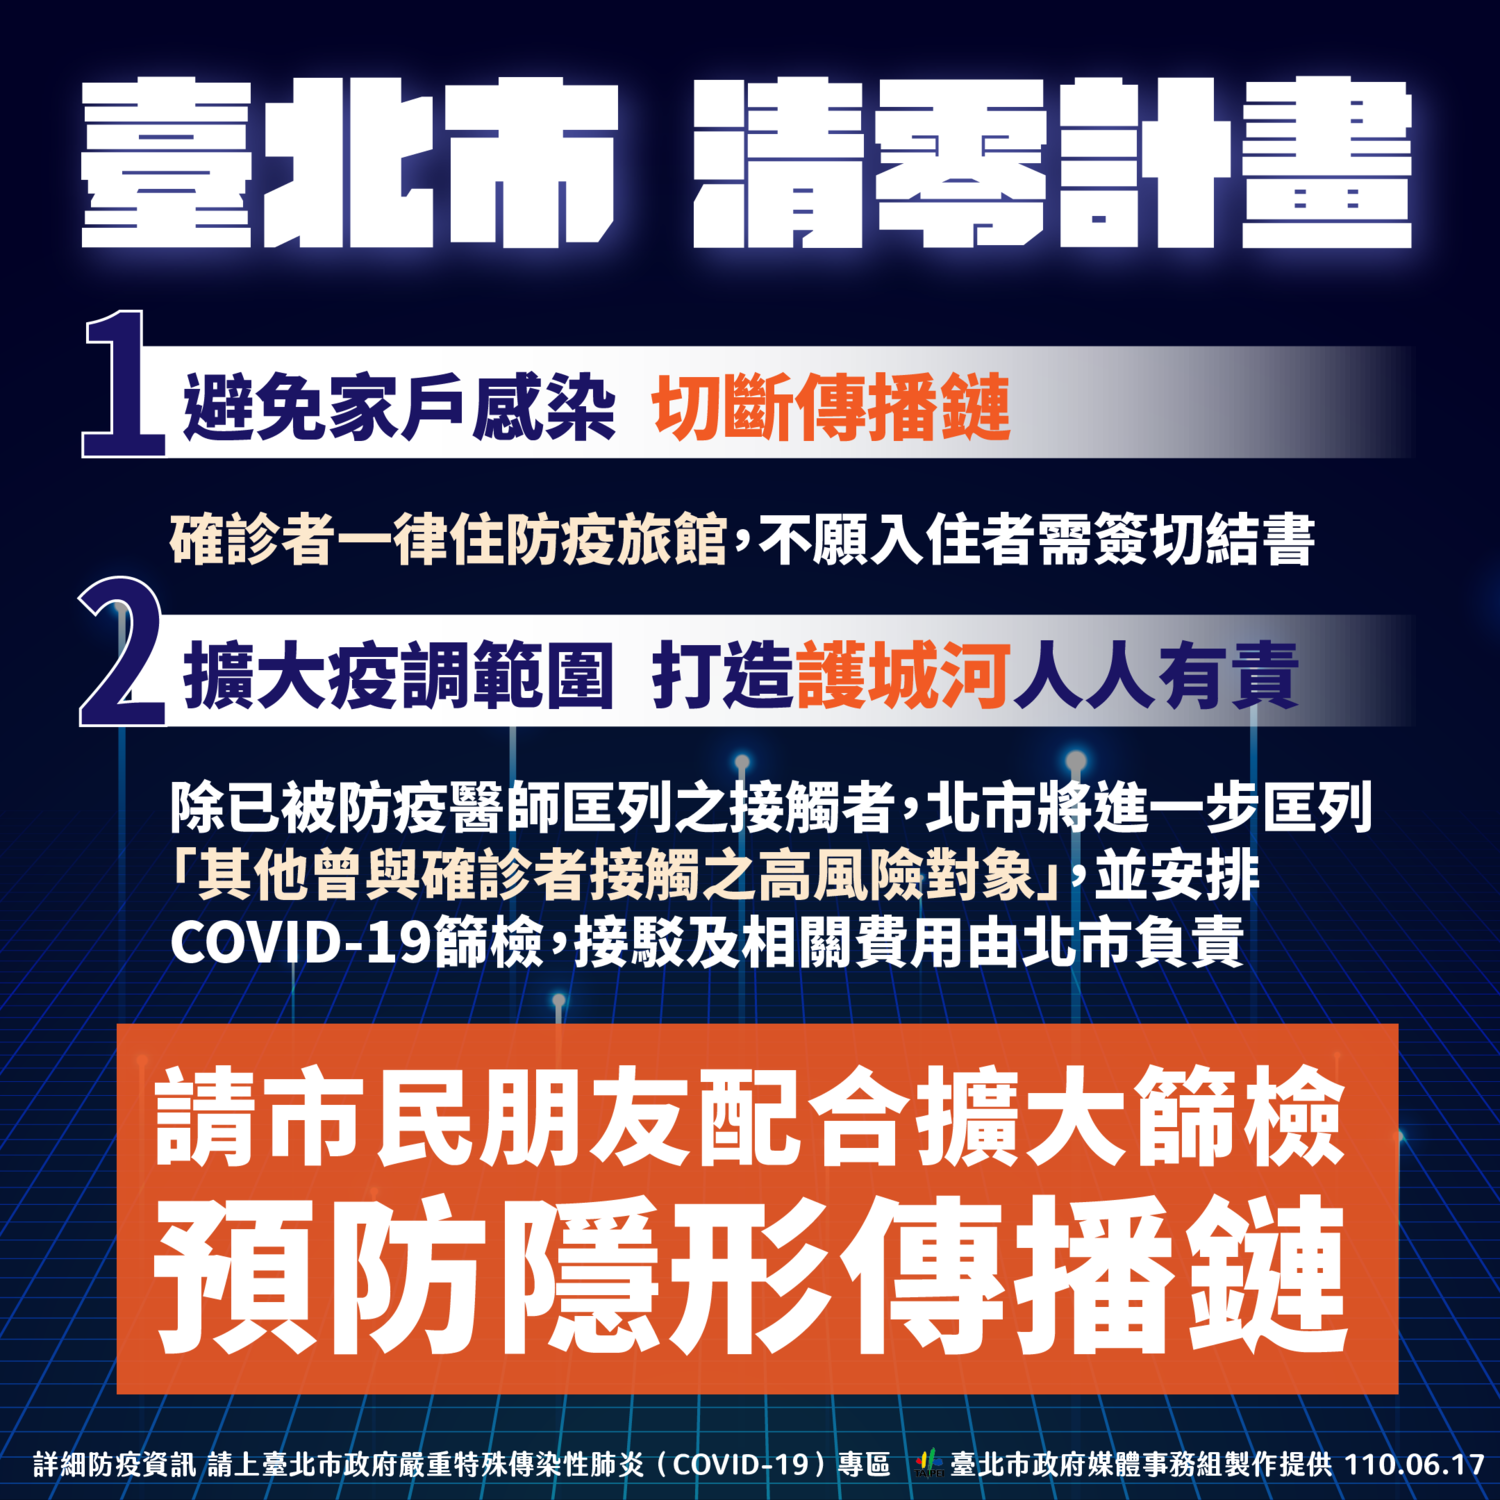 Quarantine measures aiming to stop the spread of Covid-19 in neighborhood. (Source from TCG)